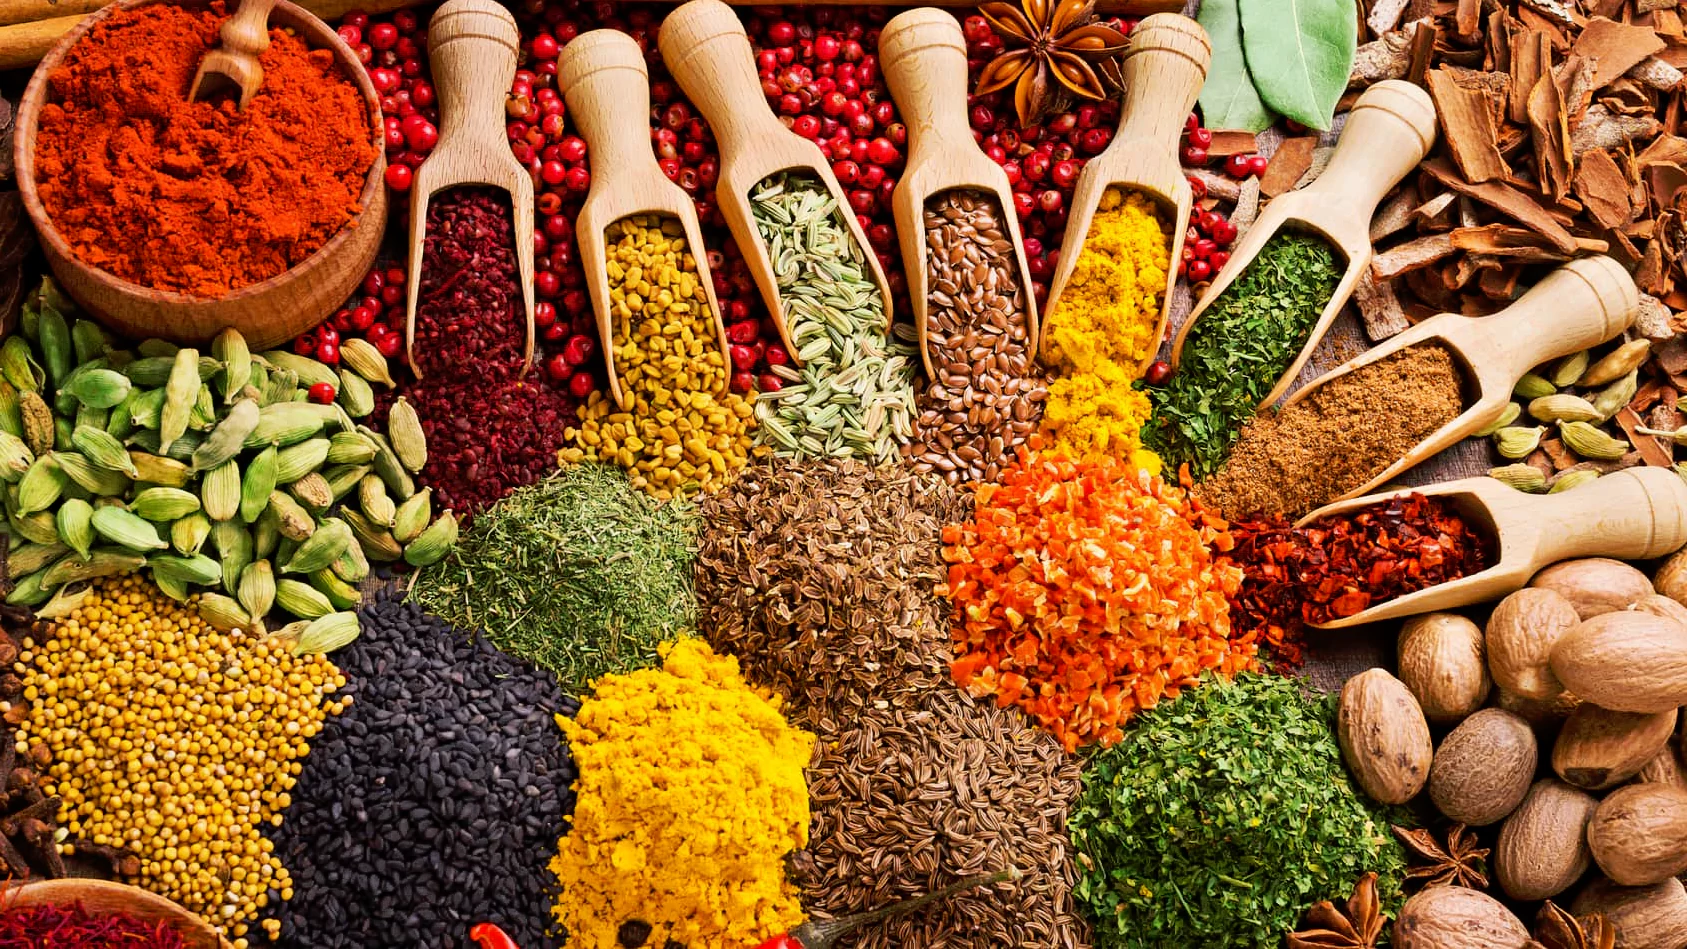 Spices as supplemental antioxidants- In vivo results with realistic dosages